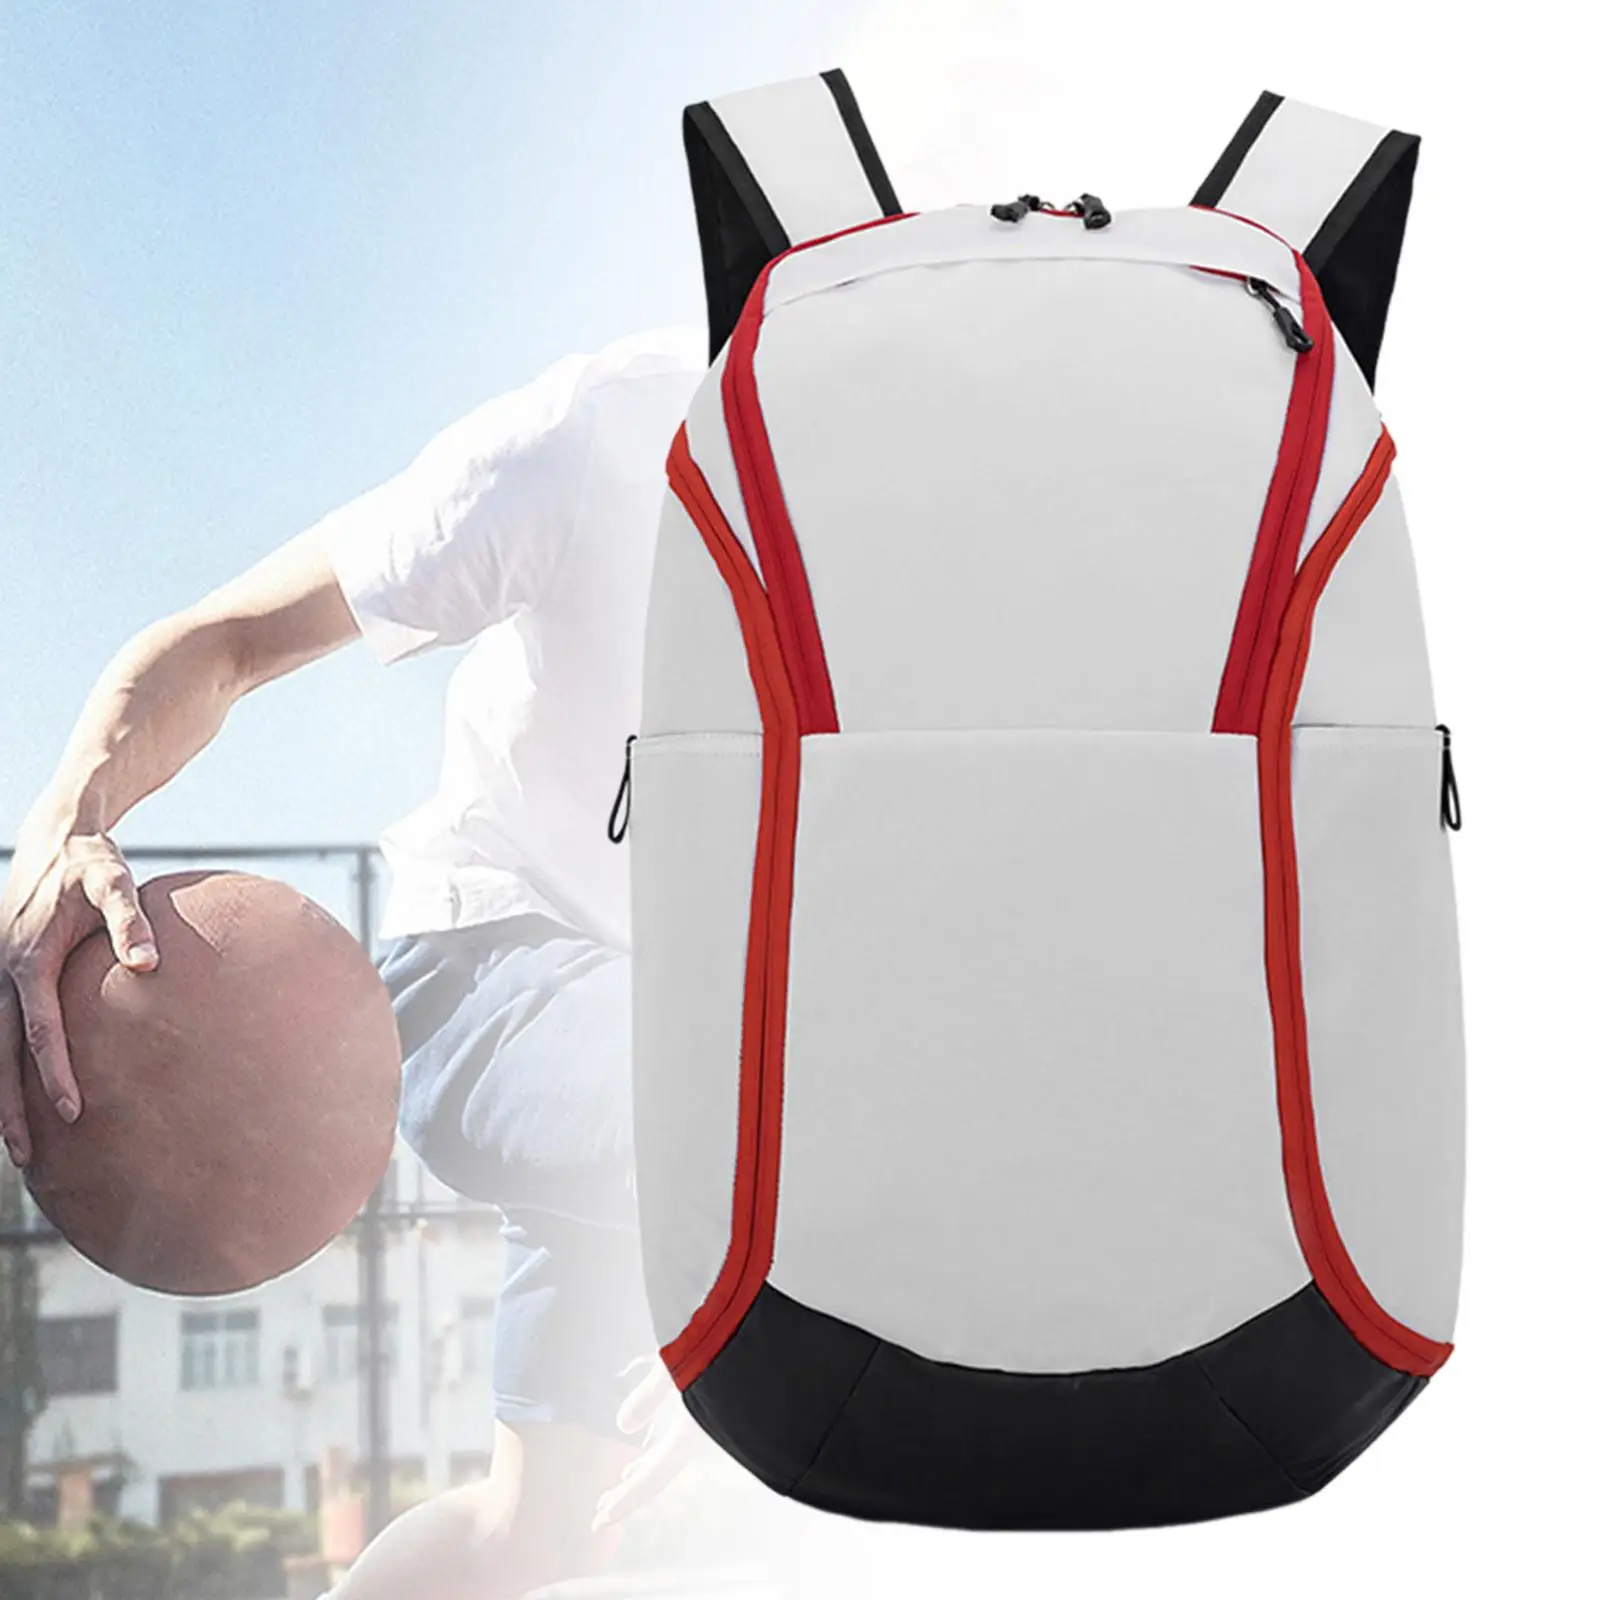 Basketball Backpack Large Sports Bag Football Backpack Outdoor Sports Equipment Bag for Rugby Ball Gym Soccer Volleyball Outdoor